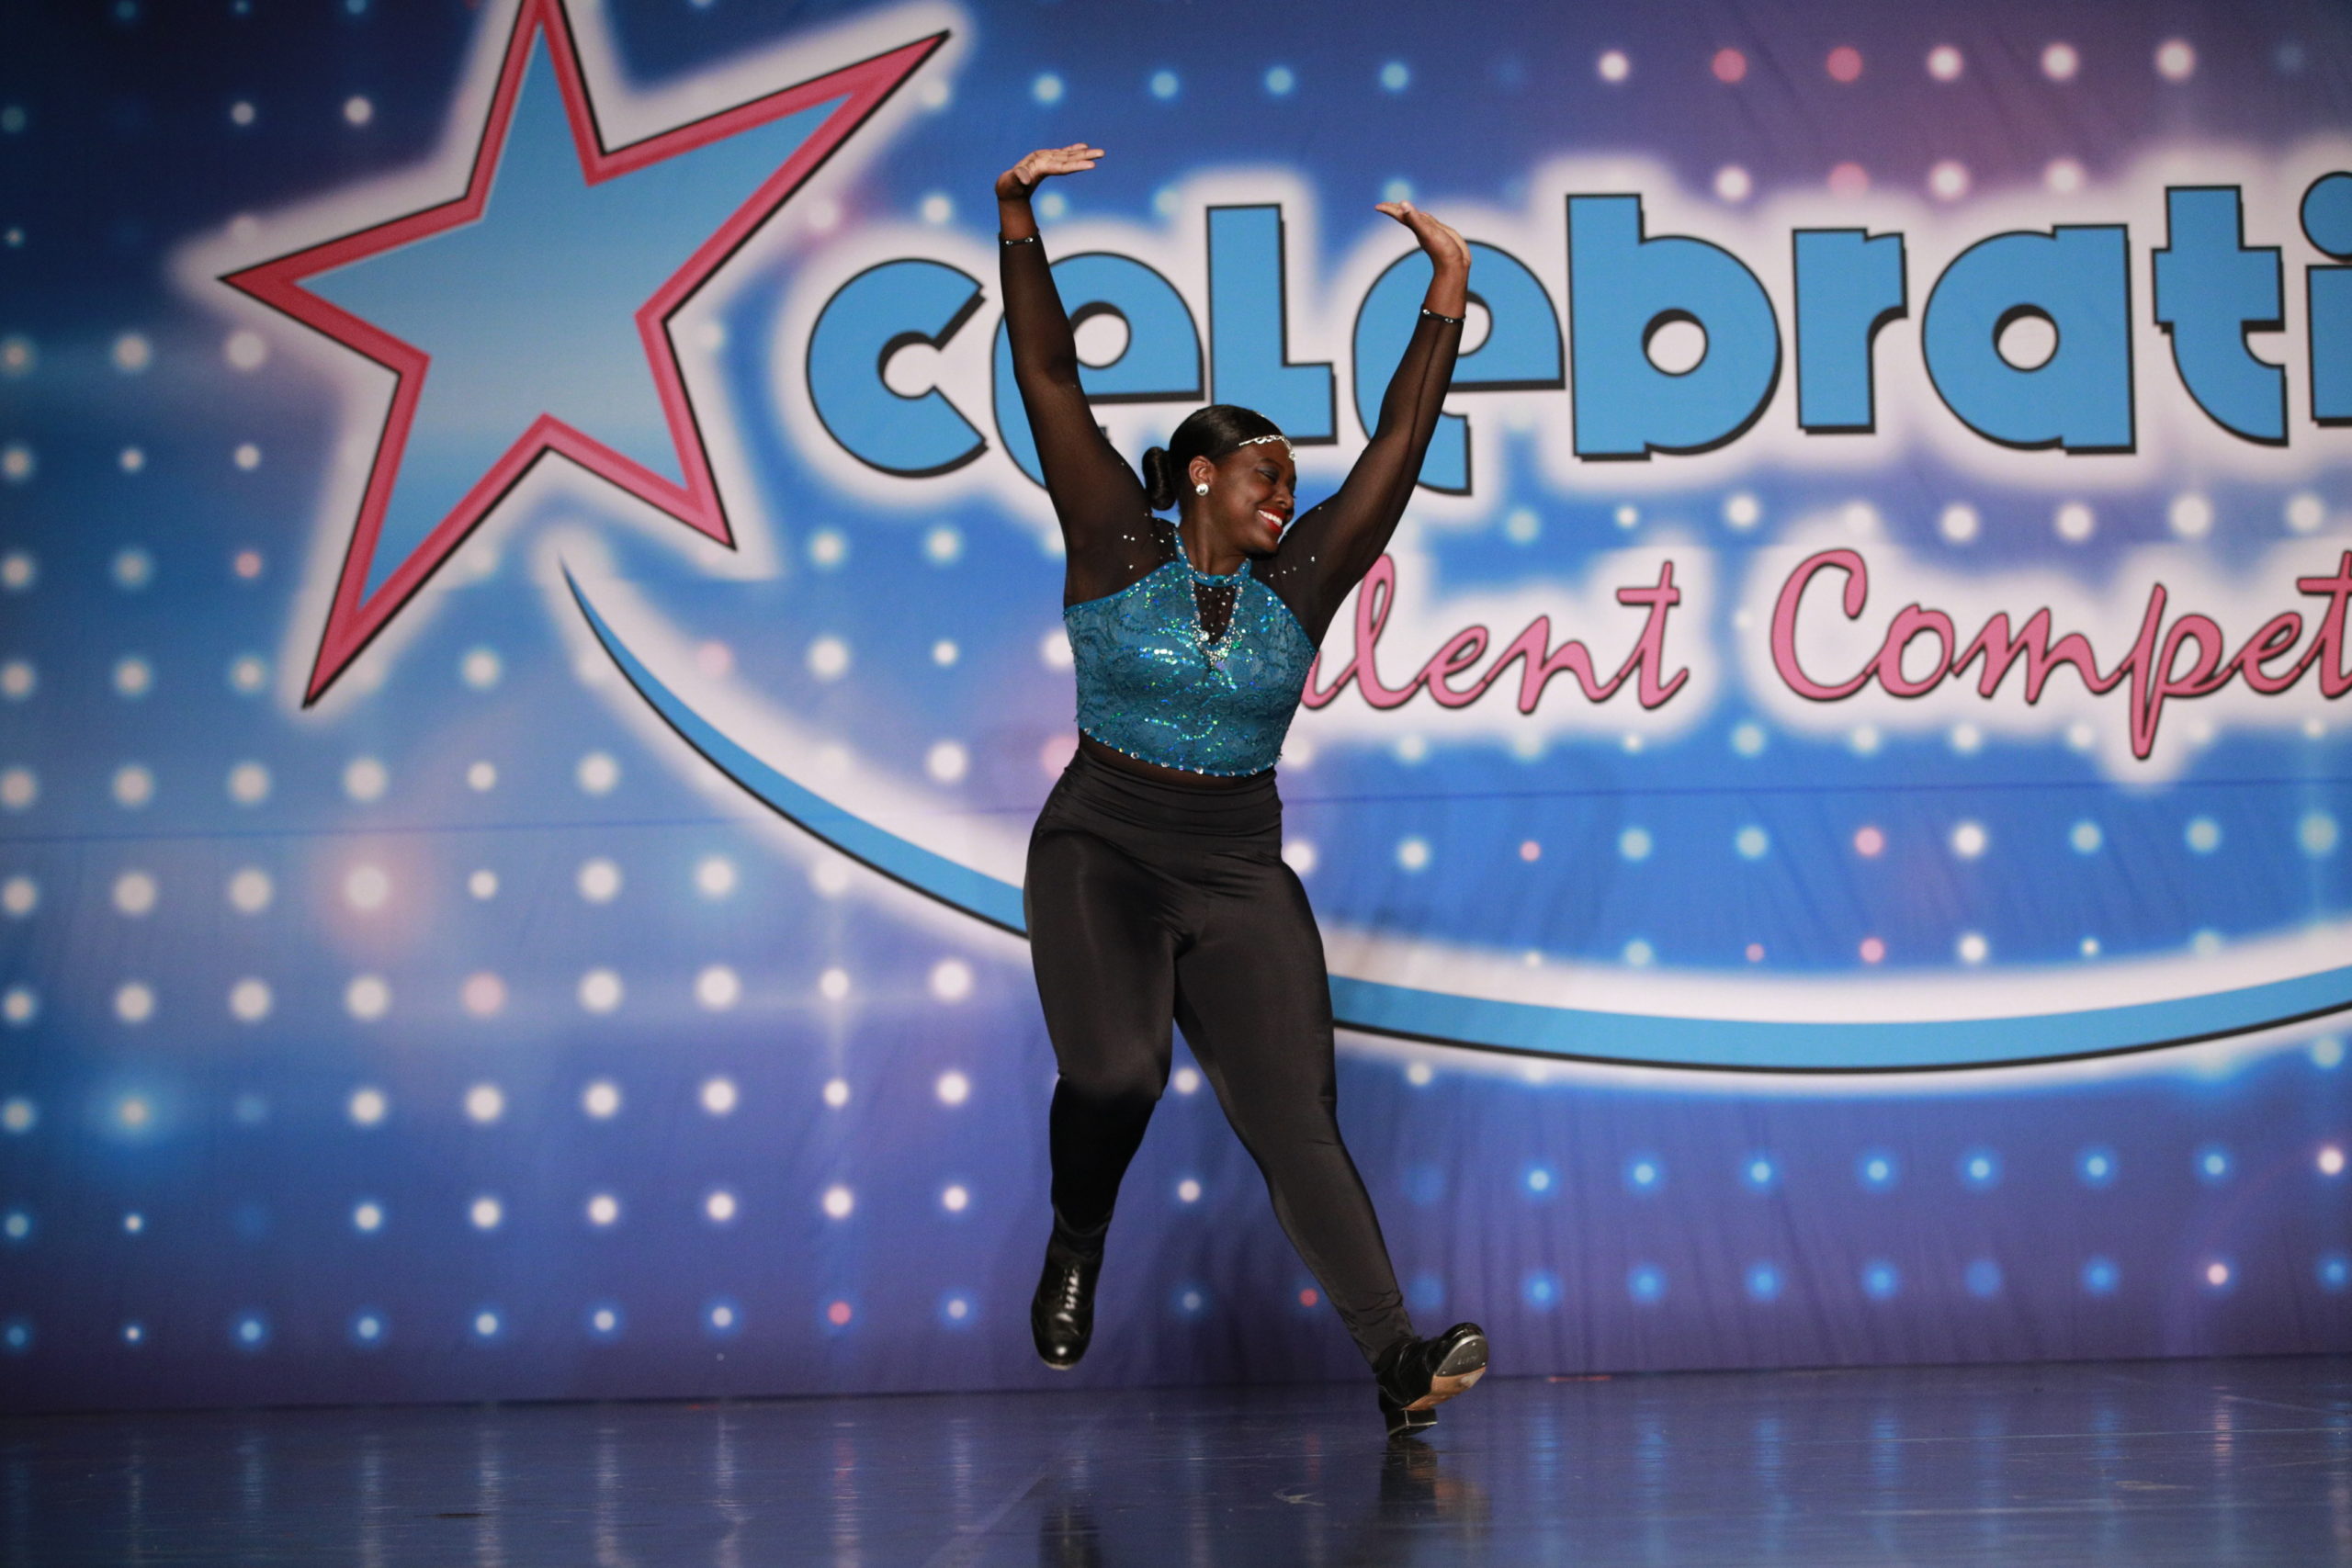 Photo of a young Black female tap dancer, wearing black leggings and a turquoise leotard with long black sleeves, dancing in front of a colorful wall that says "Celebration Talent Competition."